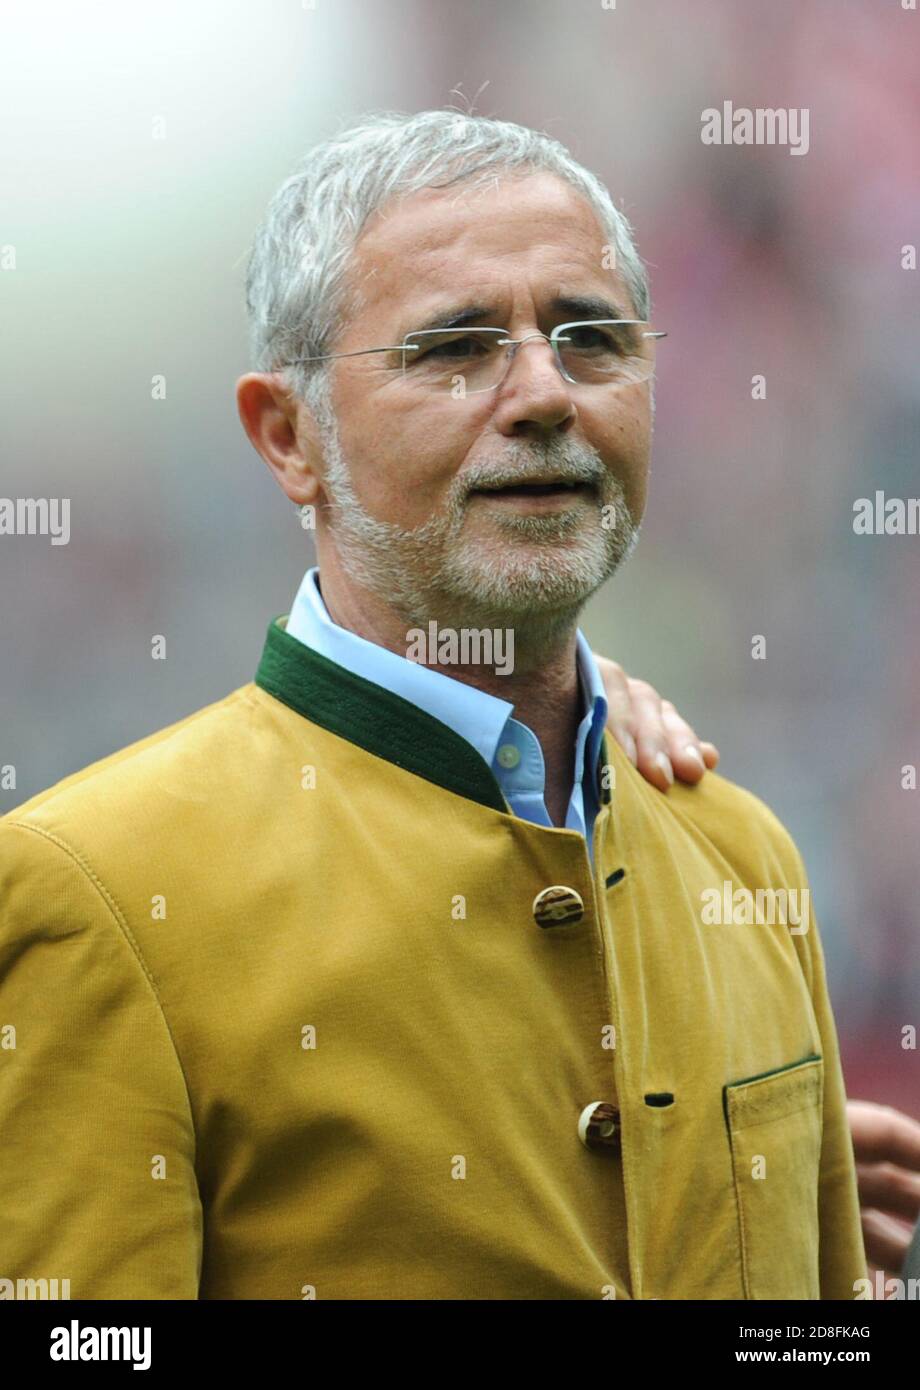 Munich, Germany. 11th May, 2013. The former FC Bayern Munich footballer, Gerd Müller, is honoured in the Allianz Arena before a Bundesliga match. (to dpa 'The 'Bomber' becomes 75: Gerd Müller 'cannot be lifted high enough') Credit: picture alliance/dpa/Alamy Live News Stock Photo